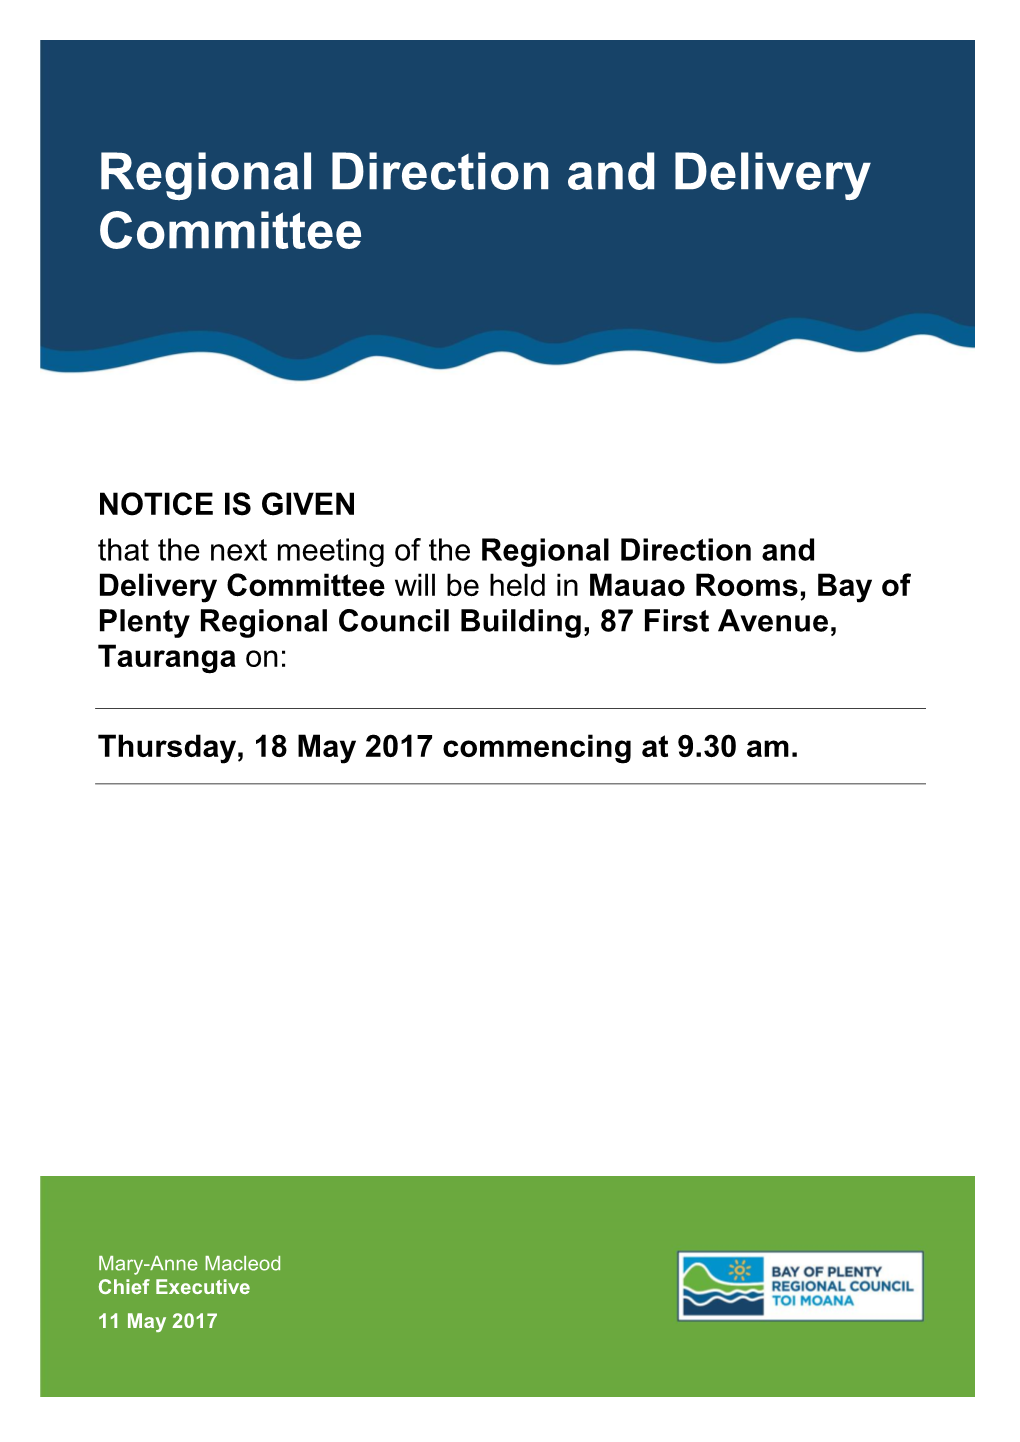 Regional Direction and Delivery Committee Will Be Held in Mauao Rooms, Bay of Plenty Regional Council Building, 87 First Avenue, Tauranga On